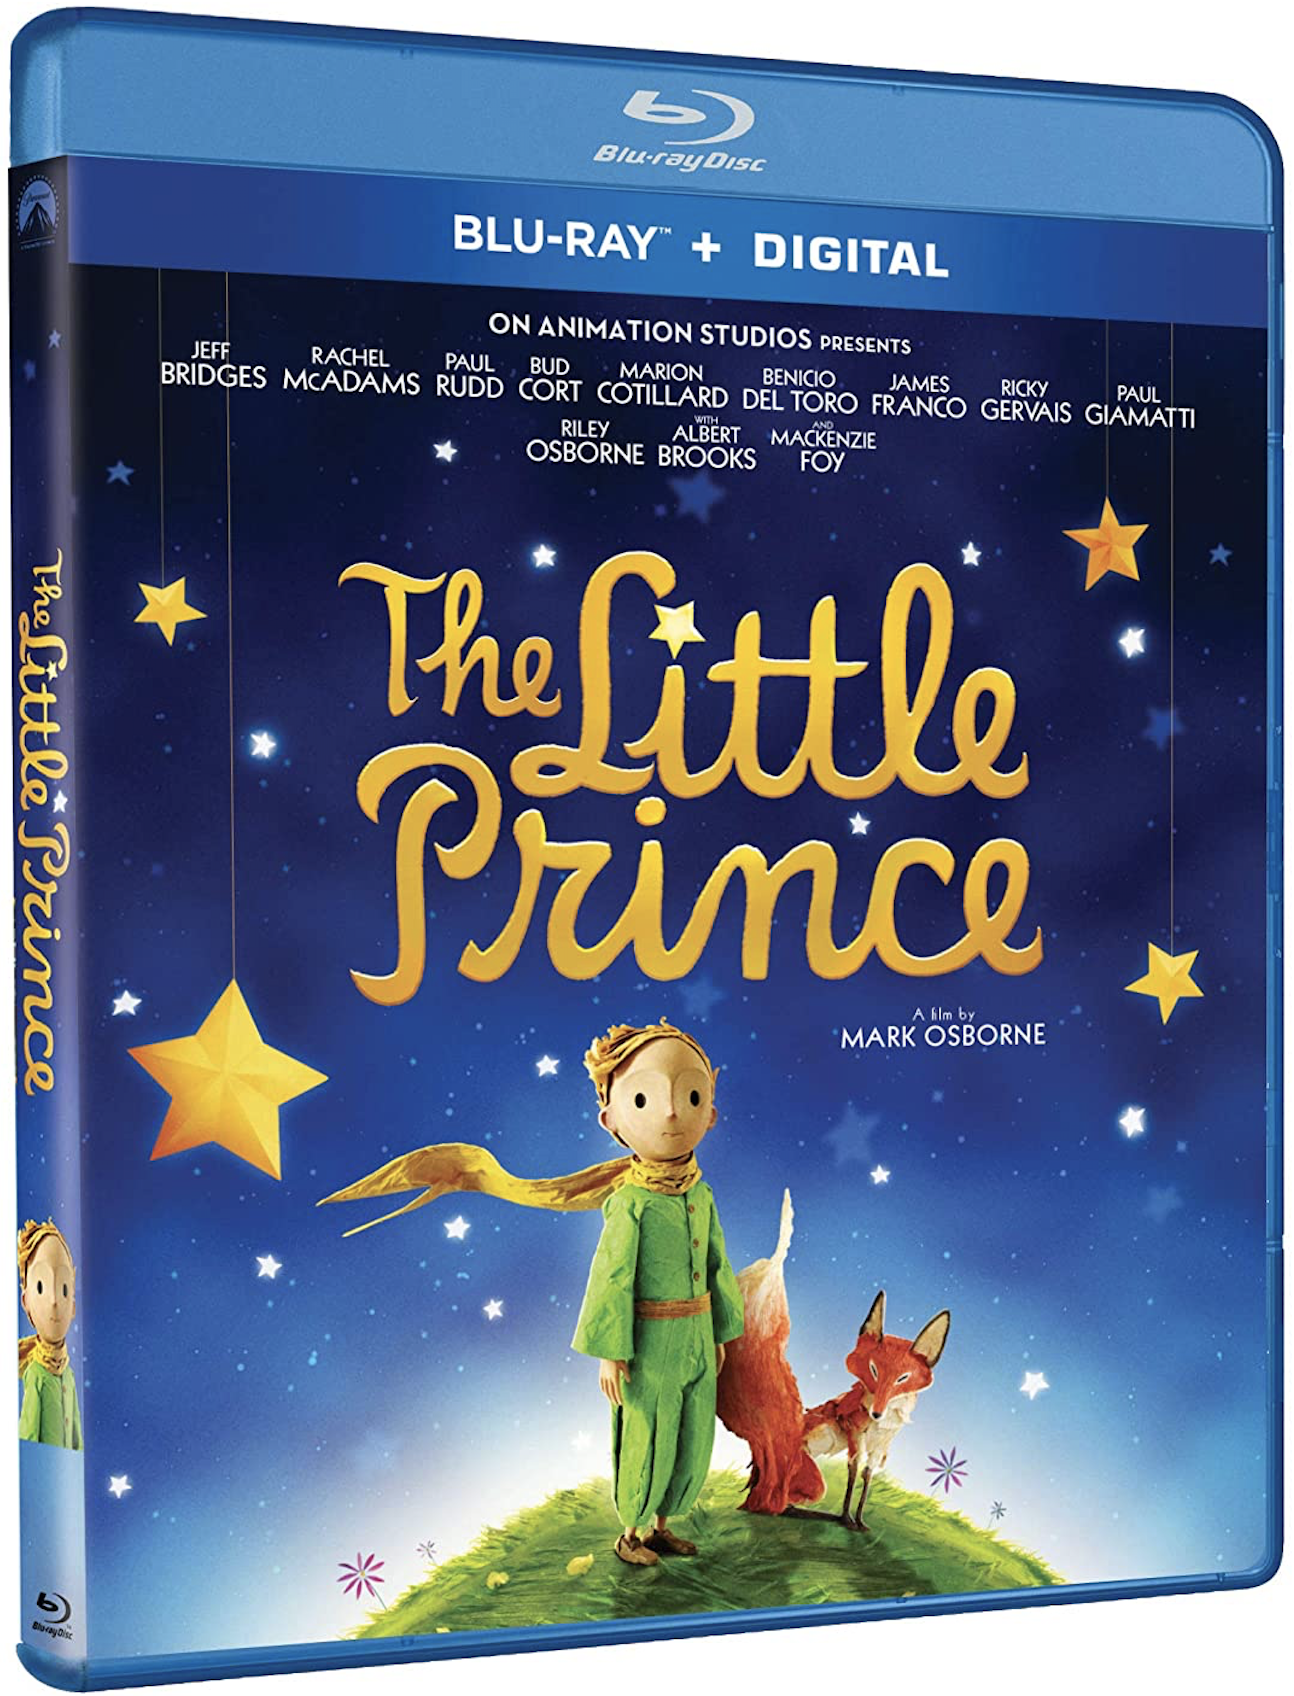 Film Review: The Little Prince